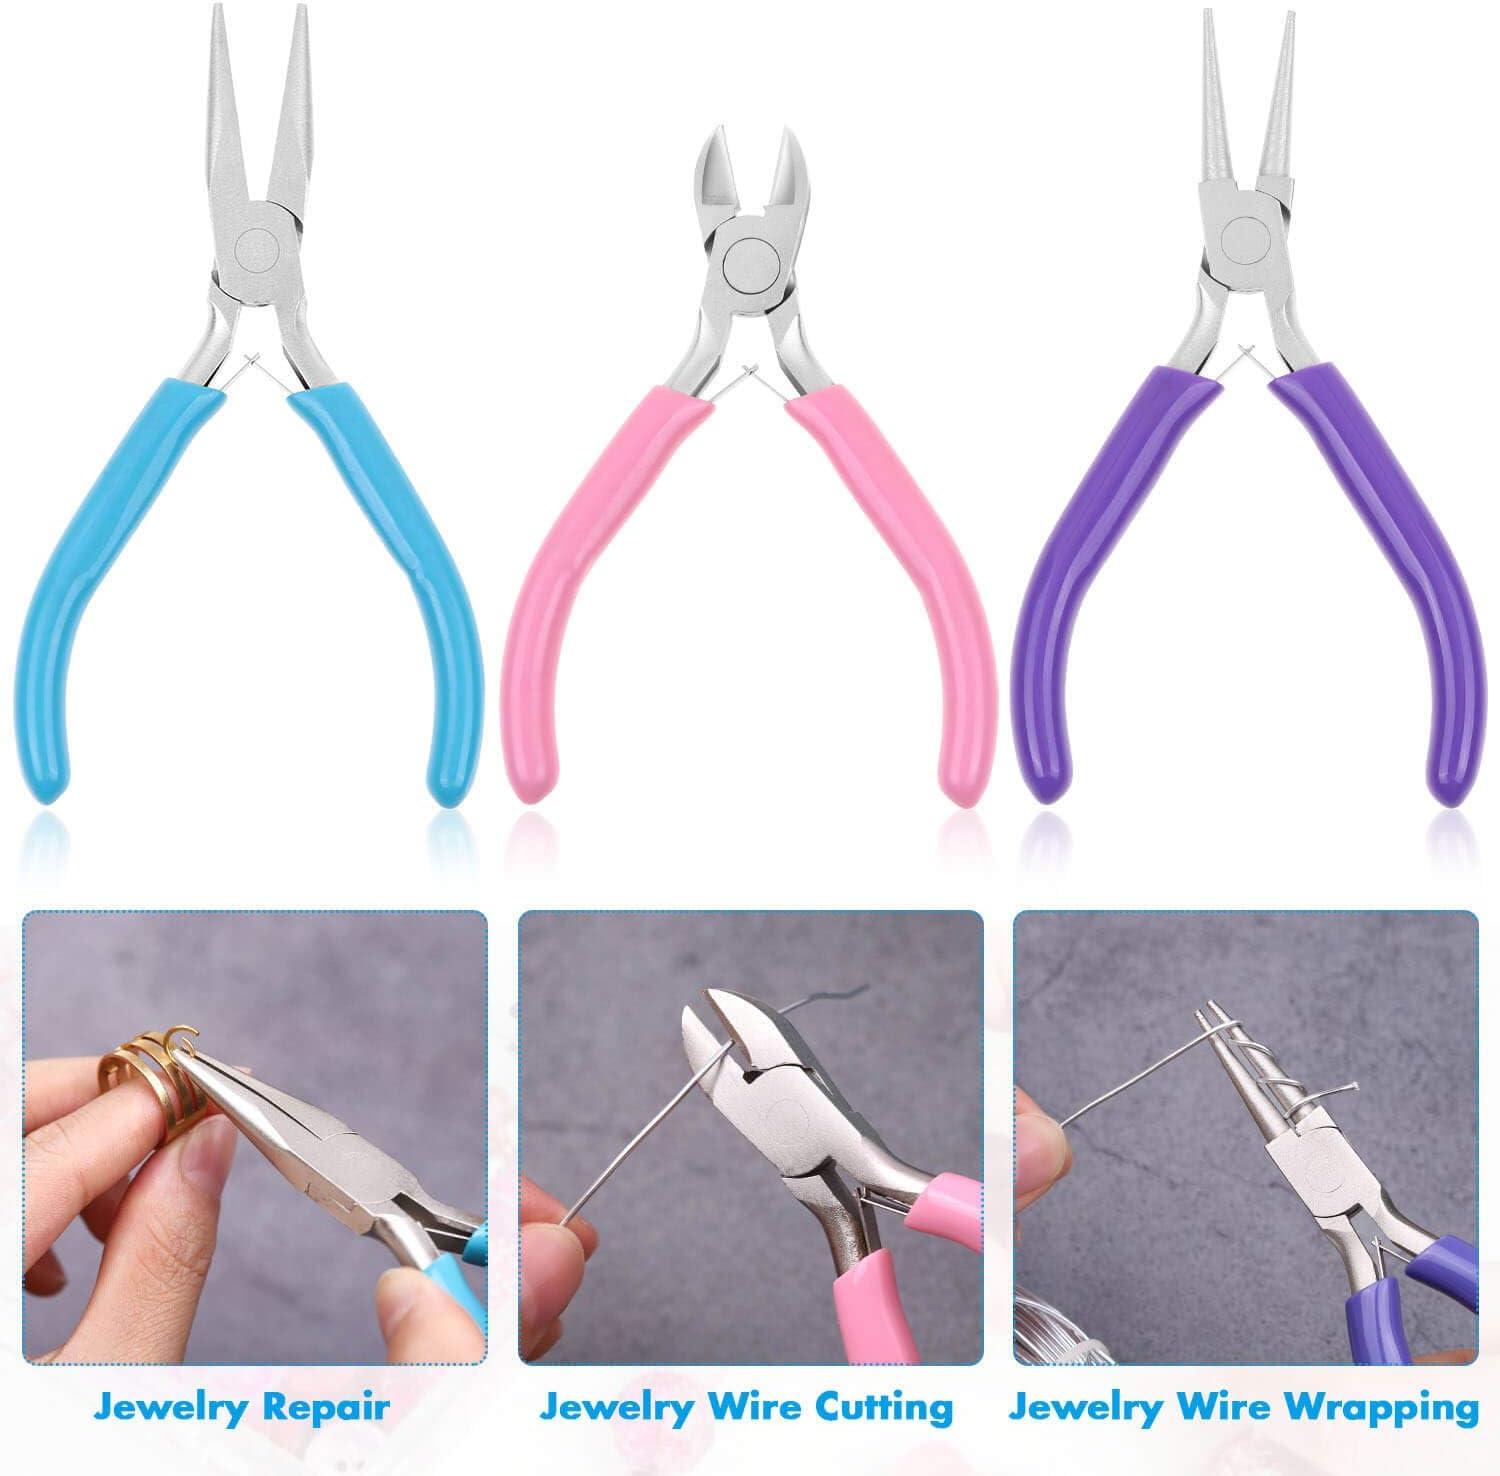 Shynek Jewelry Pliers, Set of 10 Professional Jewelry Making Pliers Tools  for Craft, Wire Wrapping